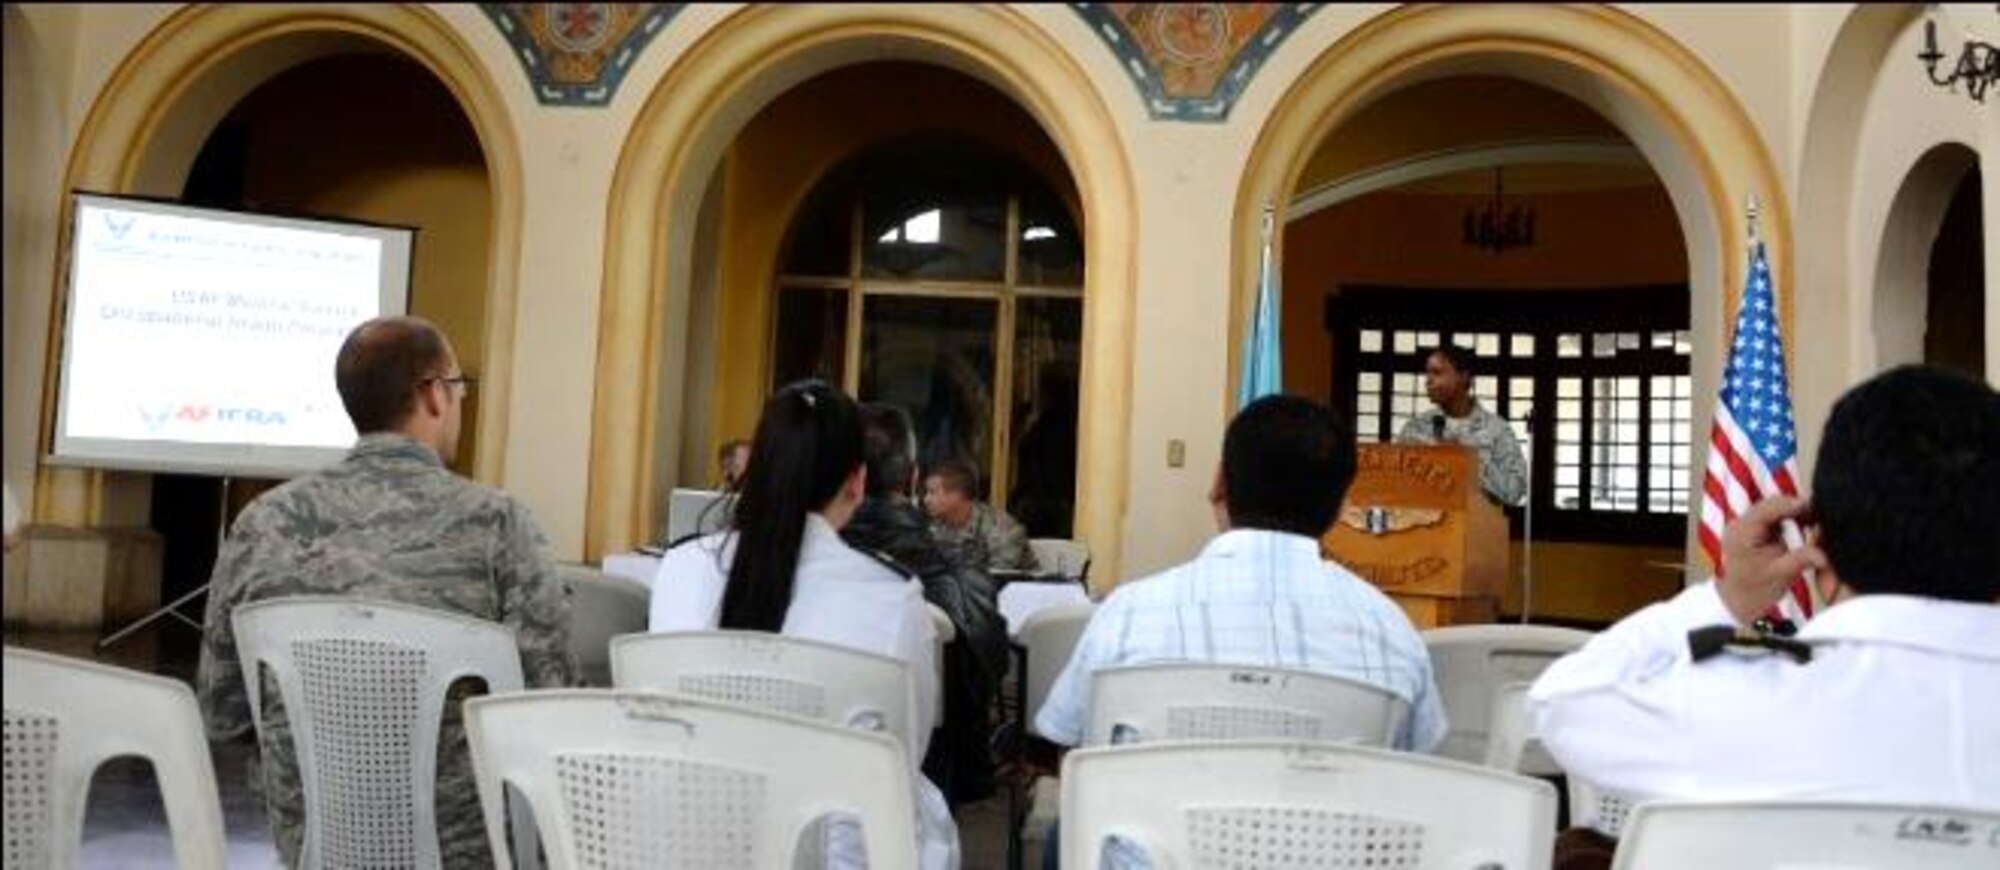 Capt. DeAndre Opoku, 12th Air Force (Air Forces Southern) International Health Specialist, briefs a group of medical professional on the importance of public health and how it relates to mission success during a subject matter expert exchange in Guatemala City, Guatemala, Aug. 6, 2014.  Airmen from members AFOUTH along with National Guard Airmen from the 189th Airlift Wing in Arkansas participated in the exchange, which focused on establishing a variety of medical programs.  (U.S. Air Force photo by Tech. Sgt. Heather R. Redman/Released)